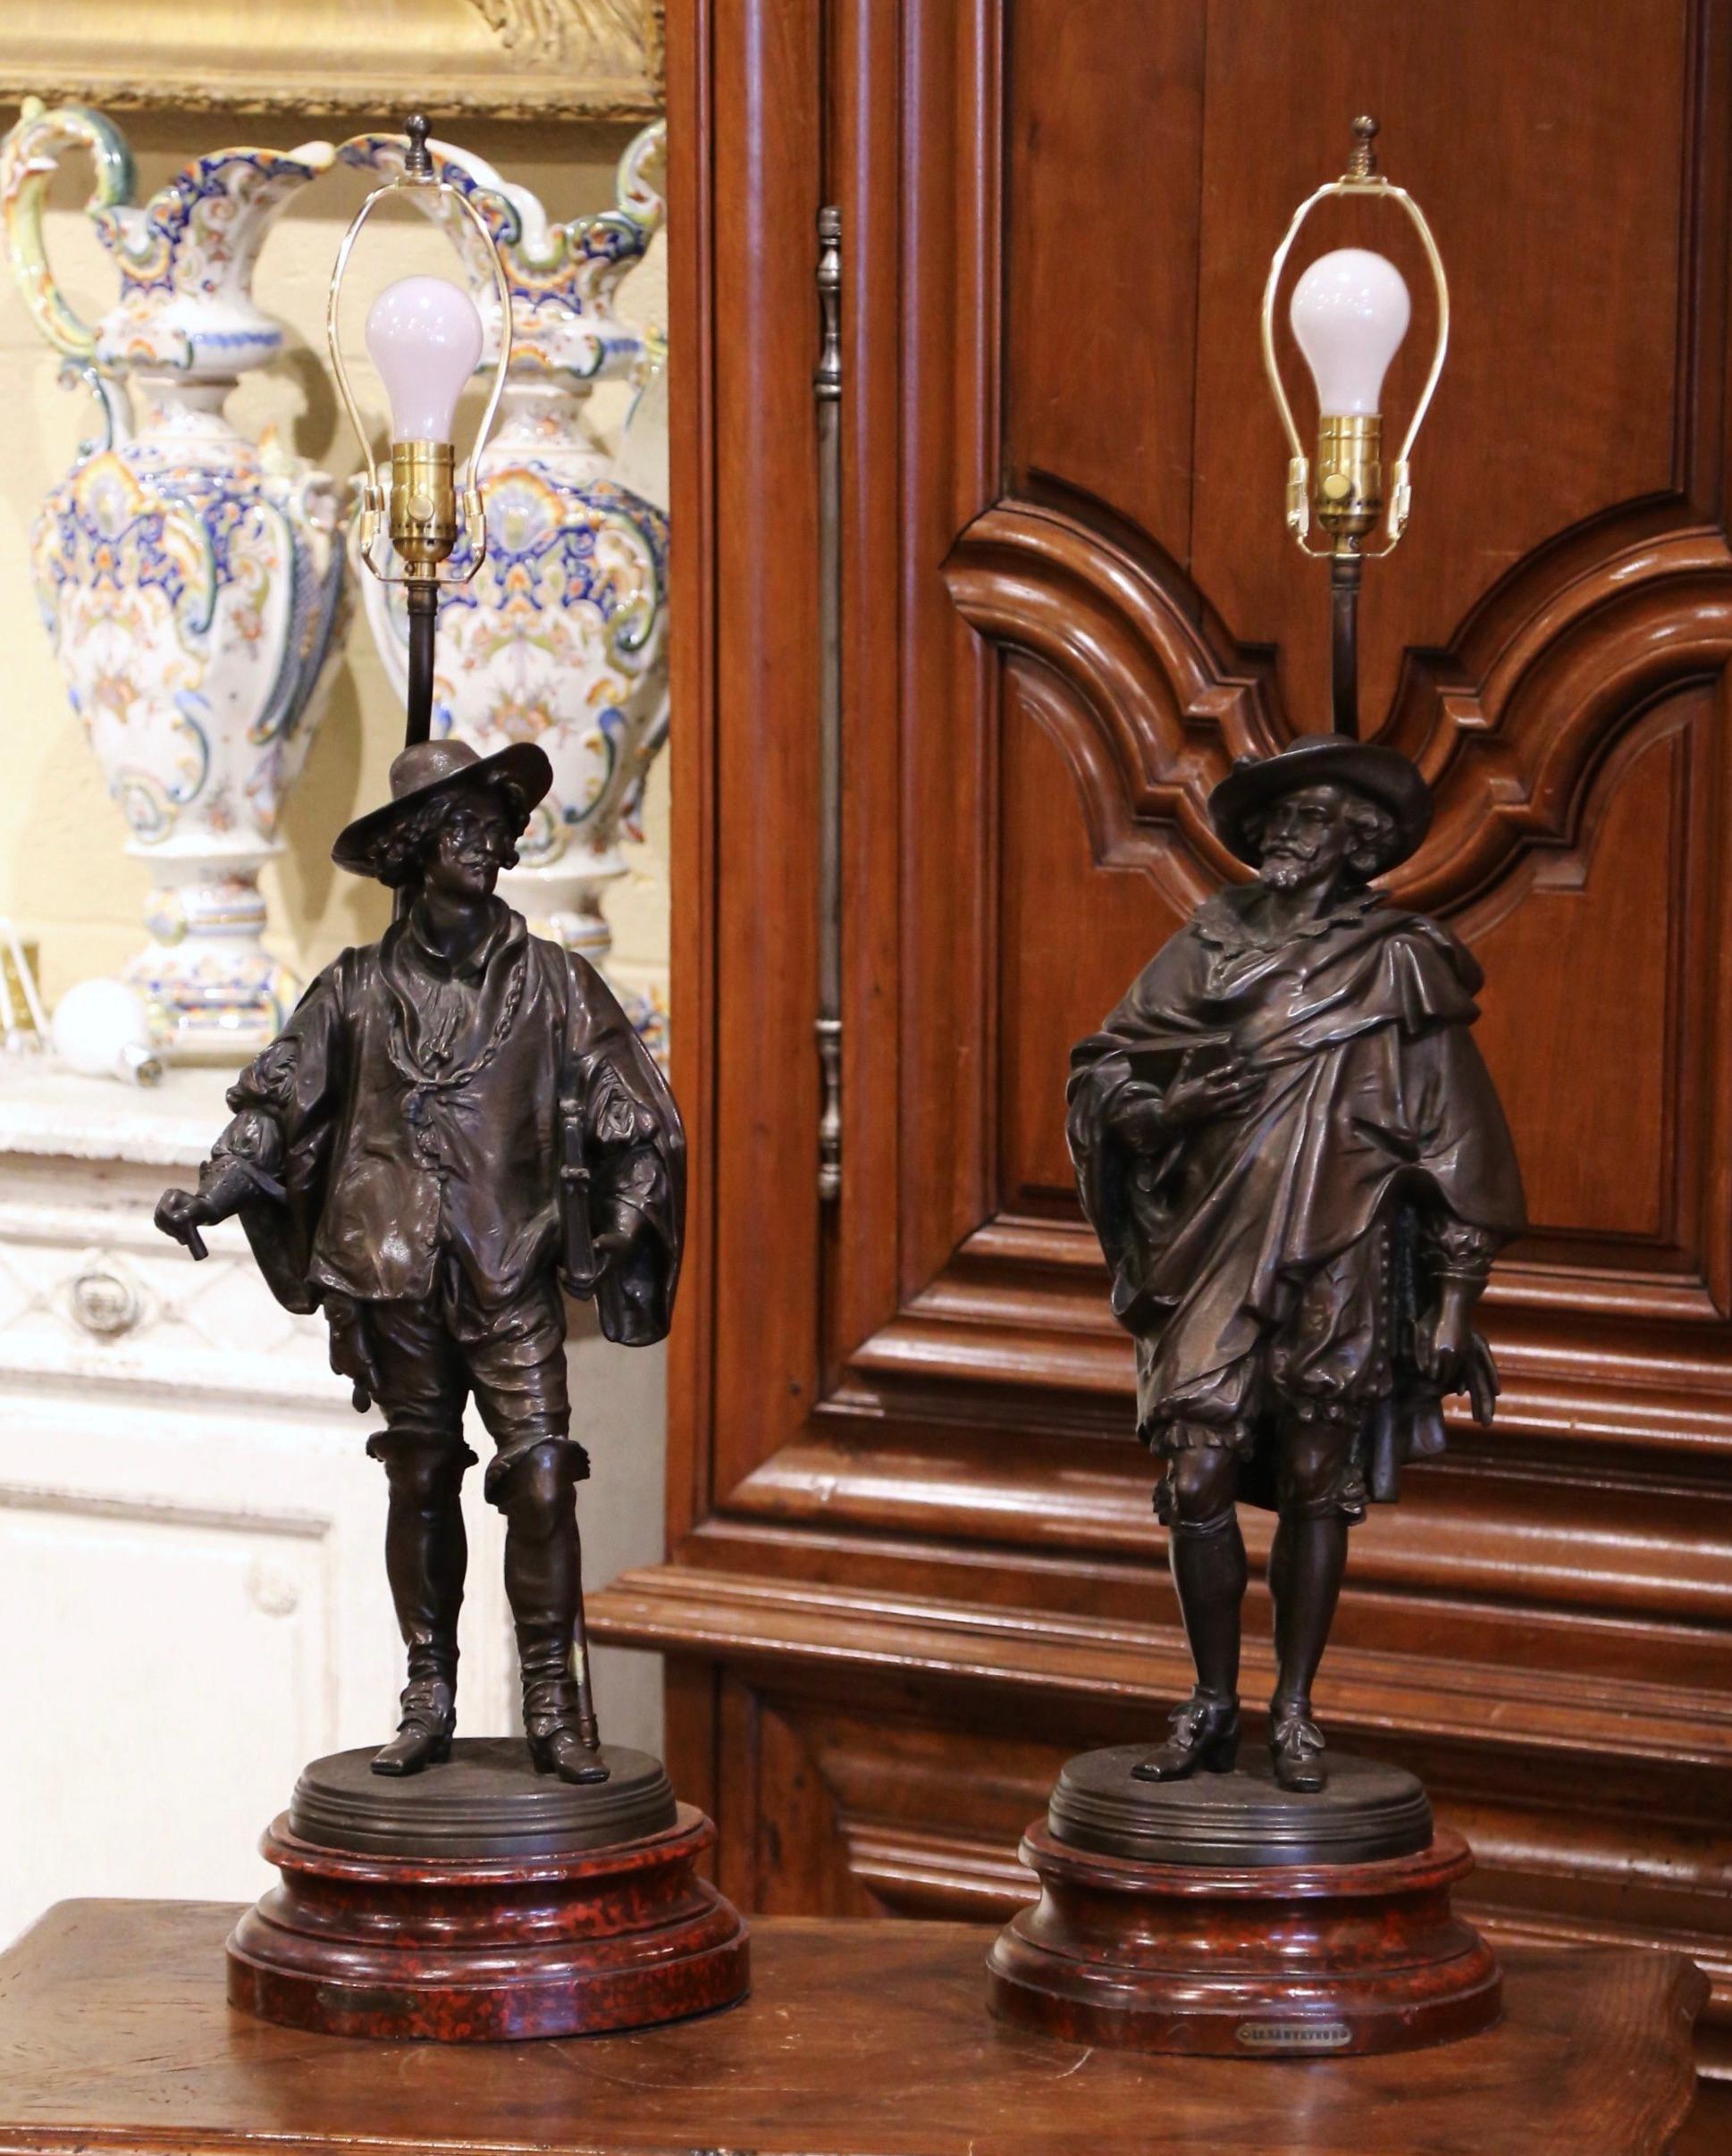 Decorate an office or entry way with this elegant pair of antique lamps. Crafted in France circa 1870, each lamp base features a Renaissance gentleman dressed in traditional clothing. Both statues have been mounted on wooden bases and wired into